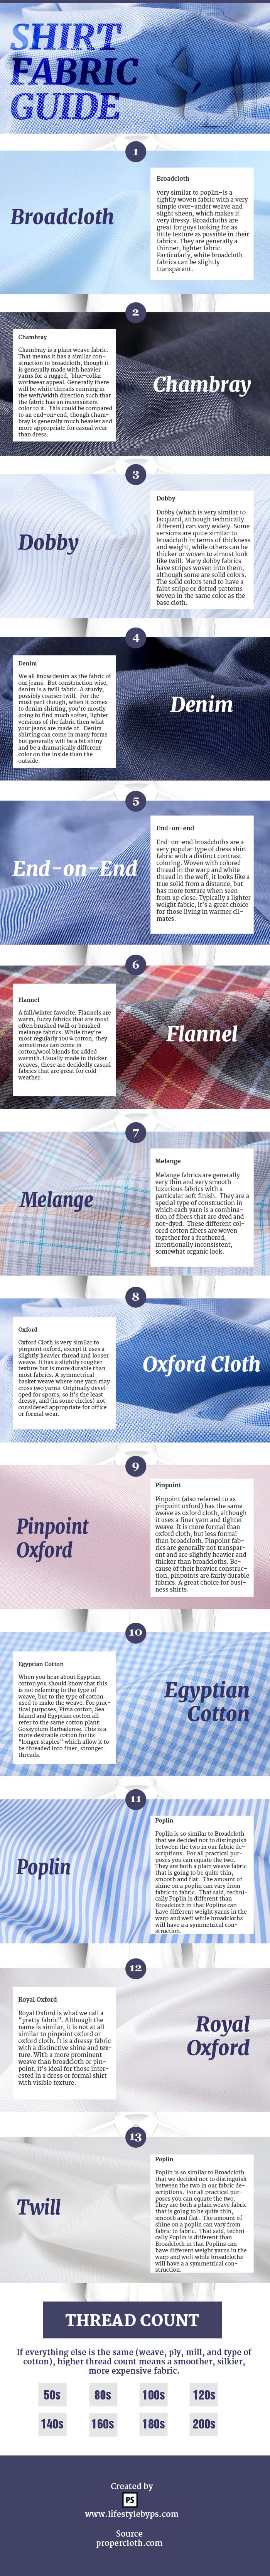 Different type of shirts fabric Infographic